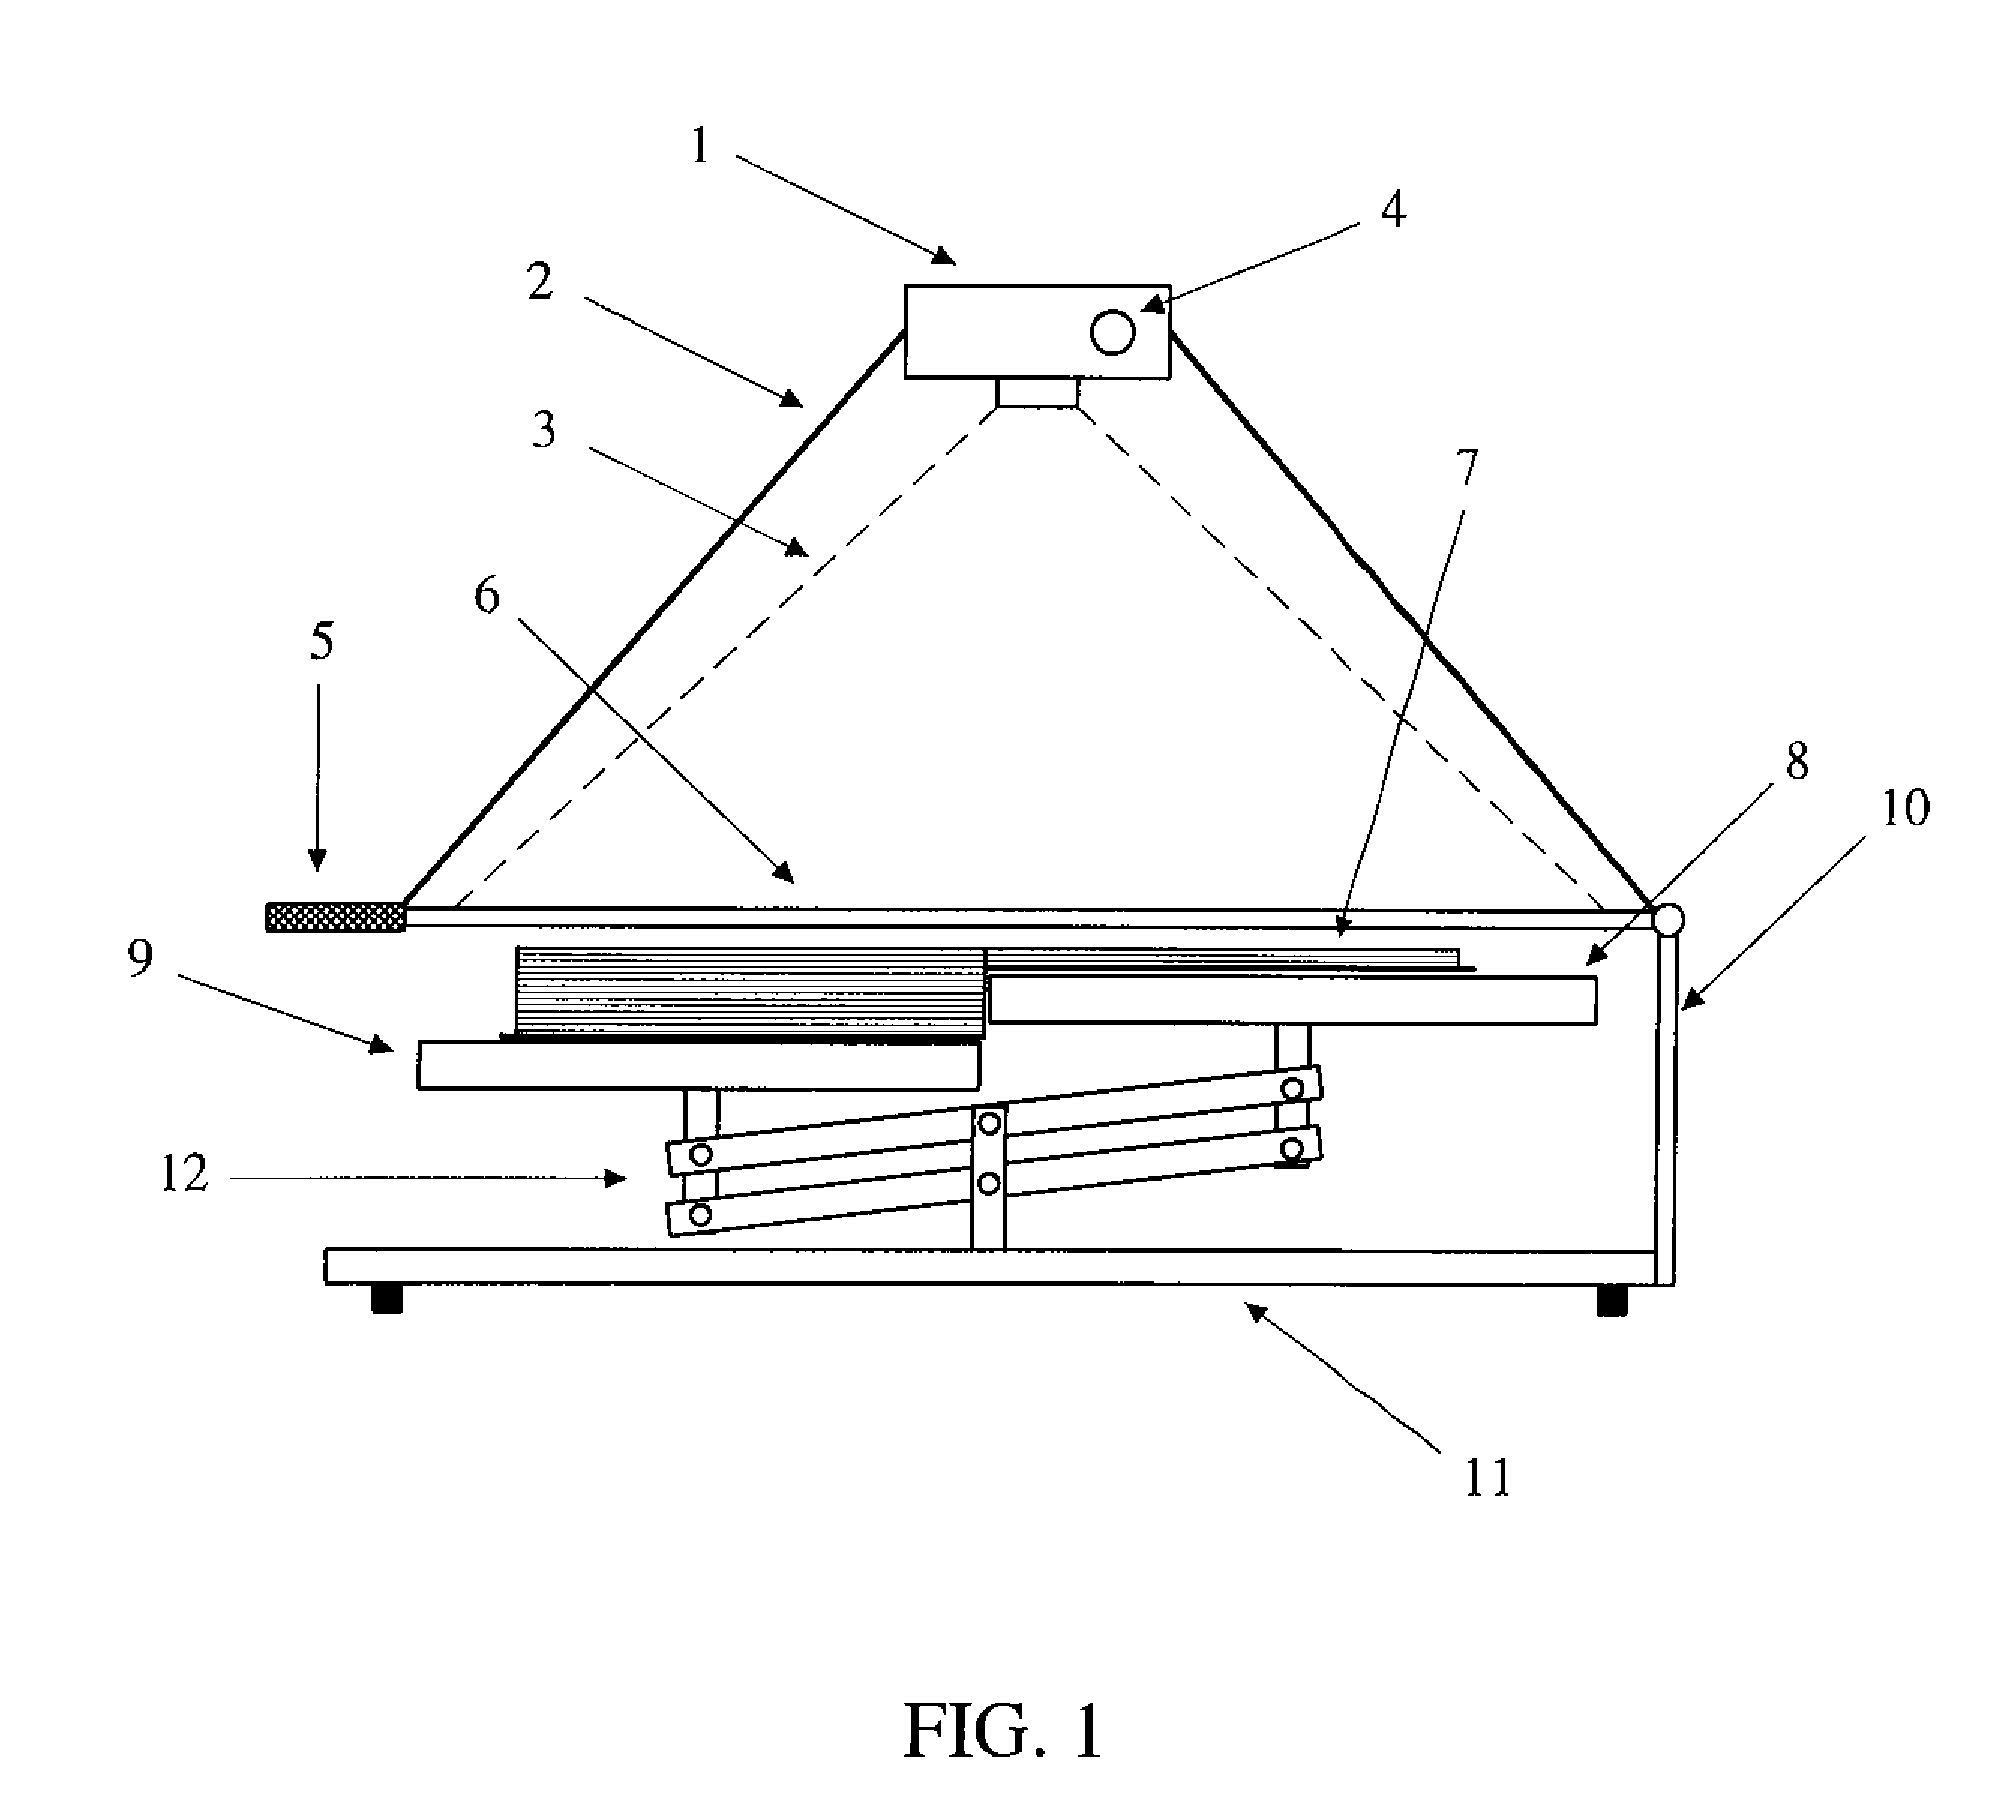 Method and apparatus for capturing the image of bound documents such as books using digital camera